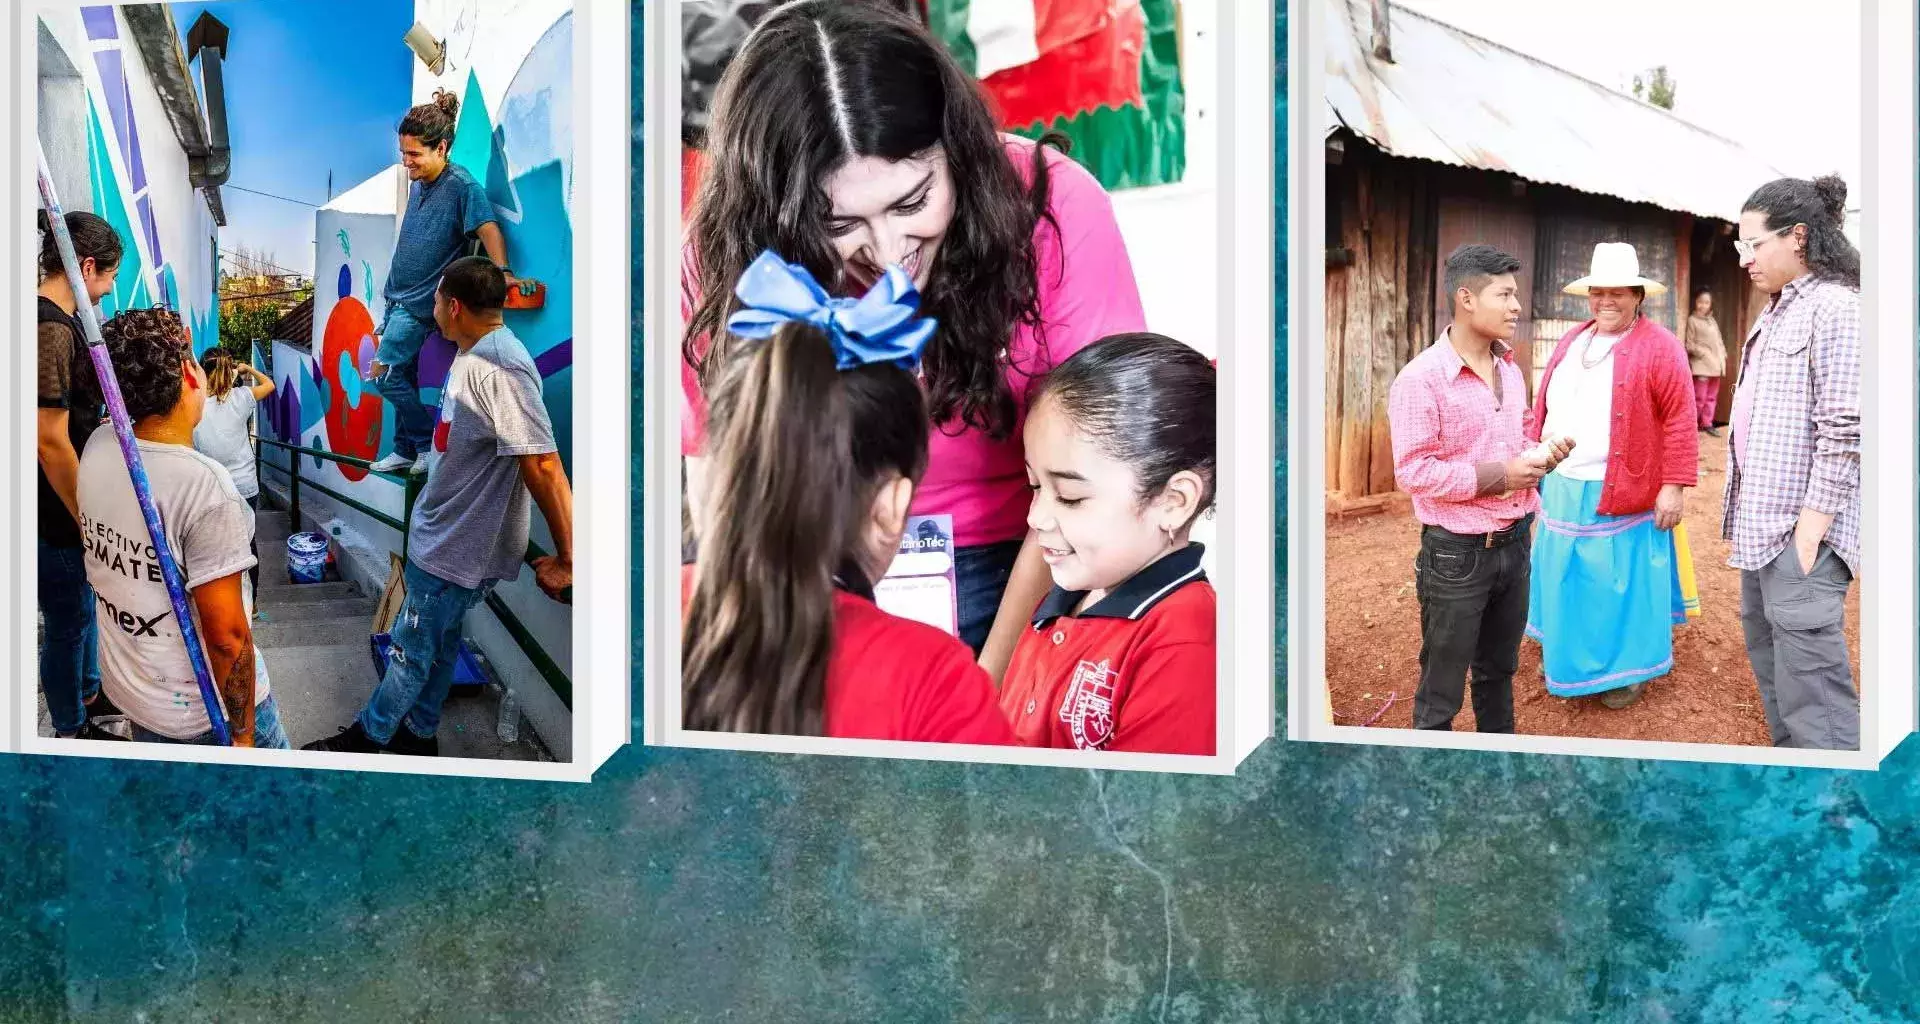 Positive Impact! Tec publishes report featuring social projects